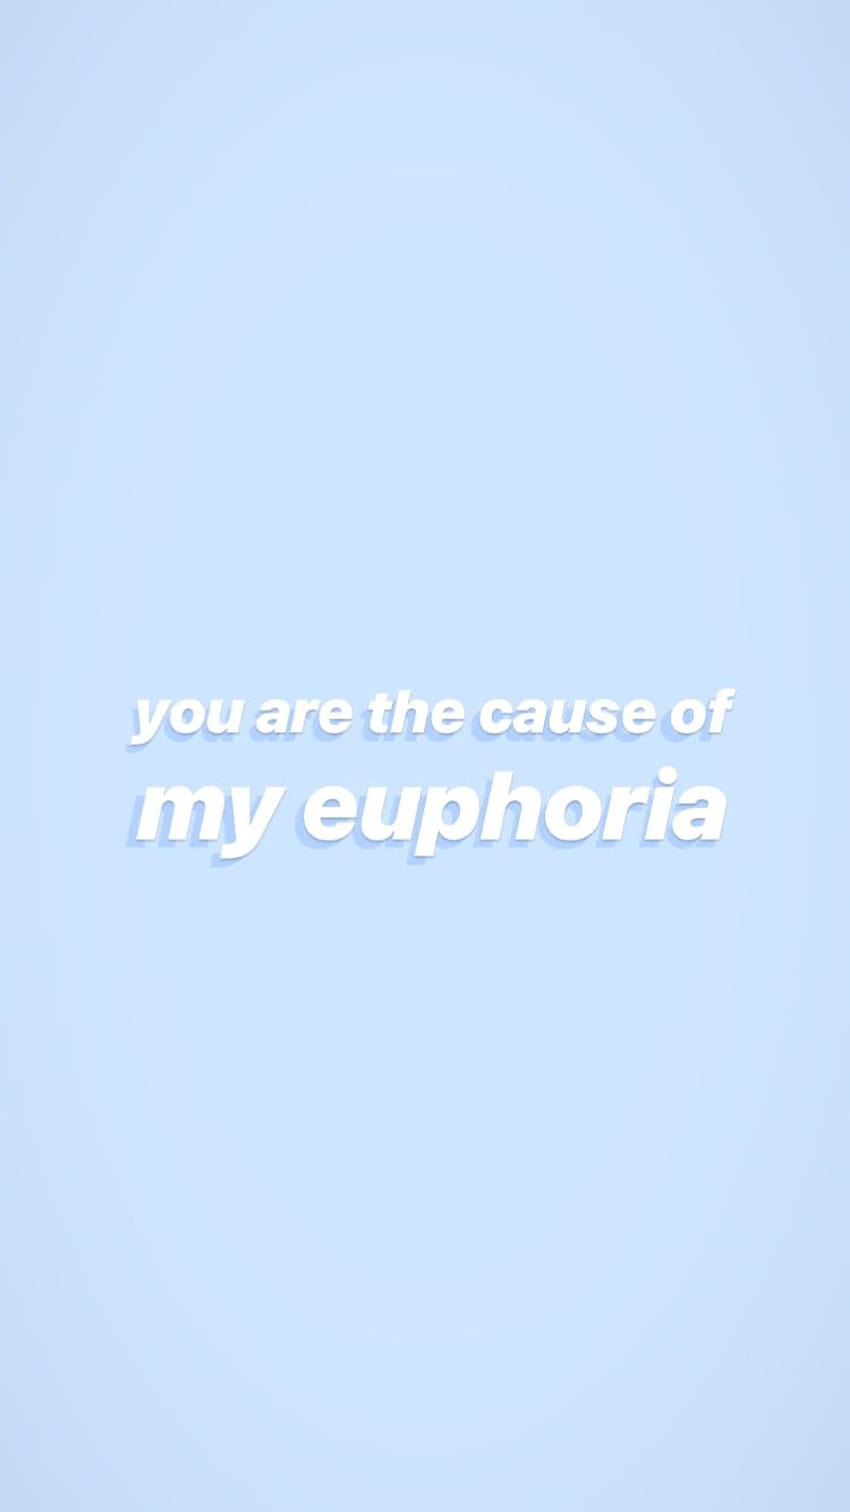 blue aesthetic // bts lyrics // you are the cause of my euphoria, bts blue HD phone wallpaper